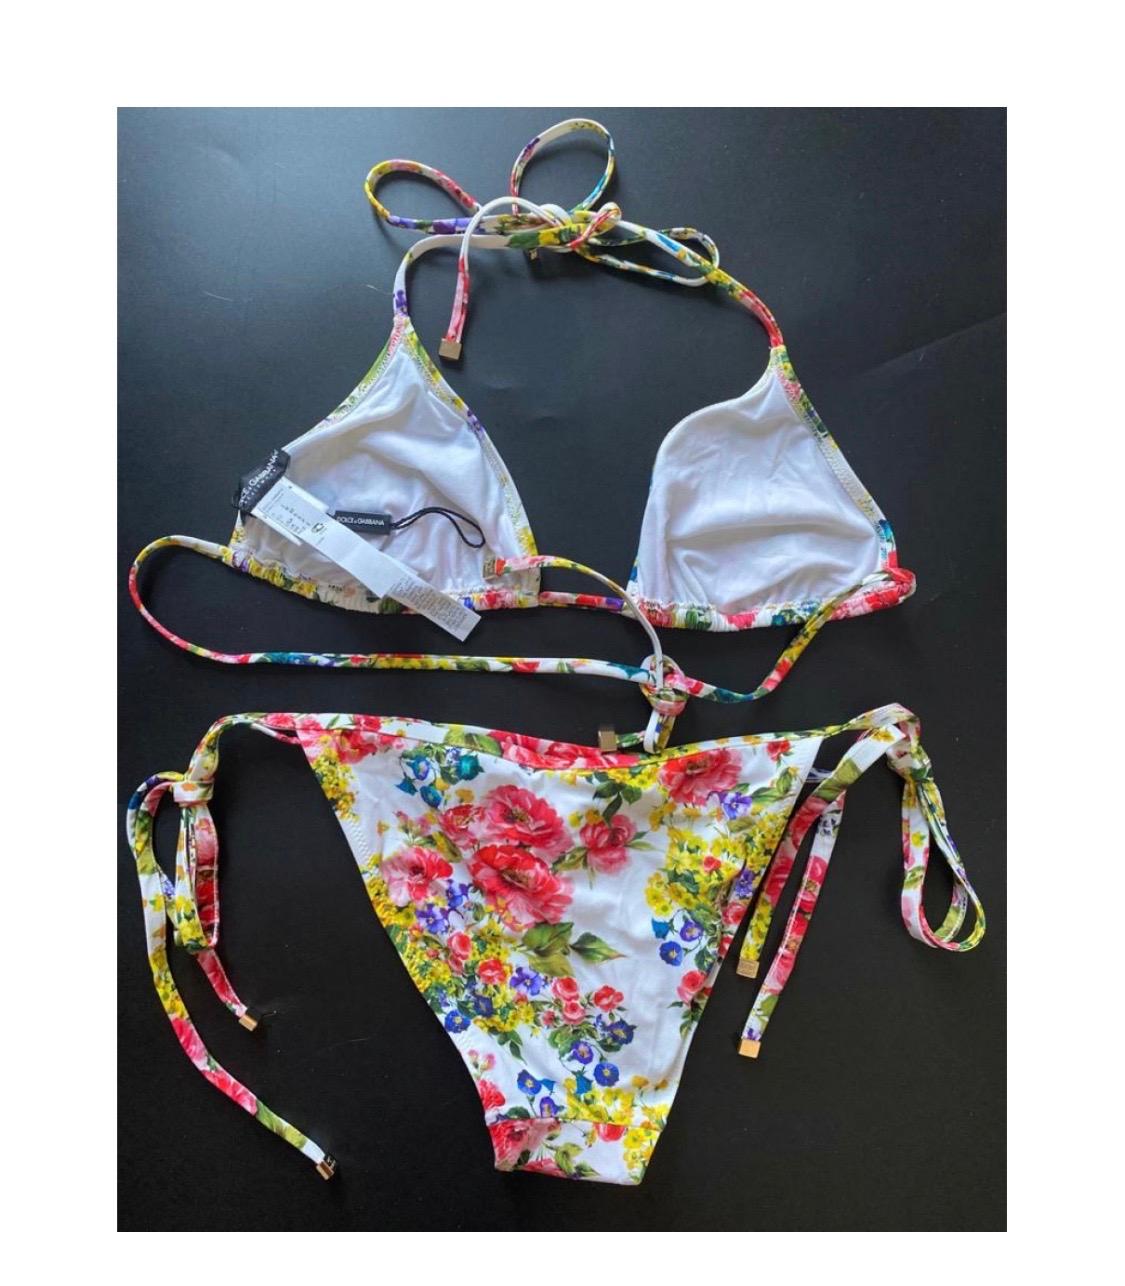 Dolce & Gabbana beachwear bikini
set in FLORAL FIELD brightly-colored
print is the absolute star of this bikini
that features an unpadded triangle
bikini top and thong bikini bottoms with
adjustable string ties in fine luxury
fabric:

Adjustable